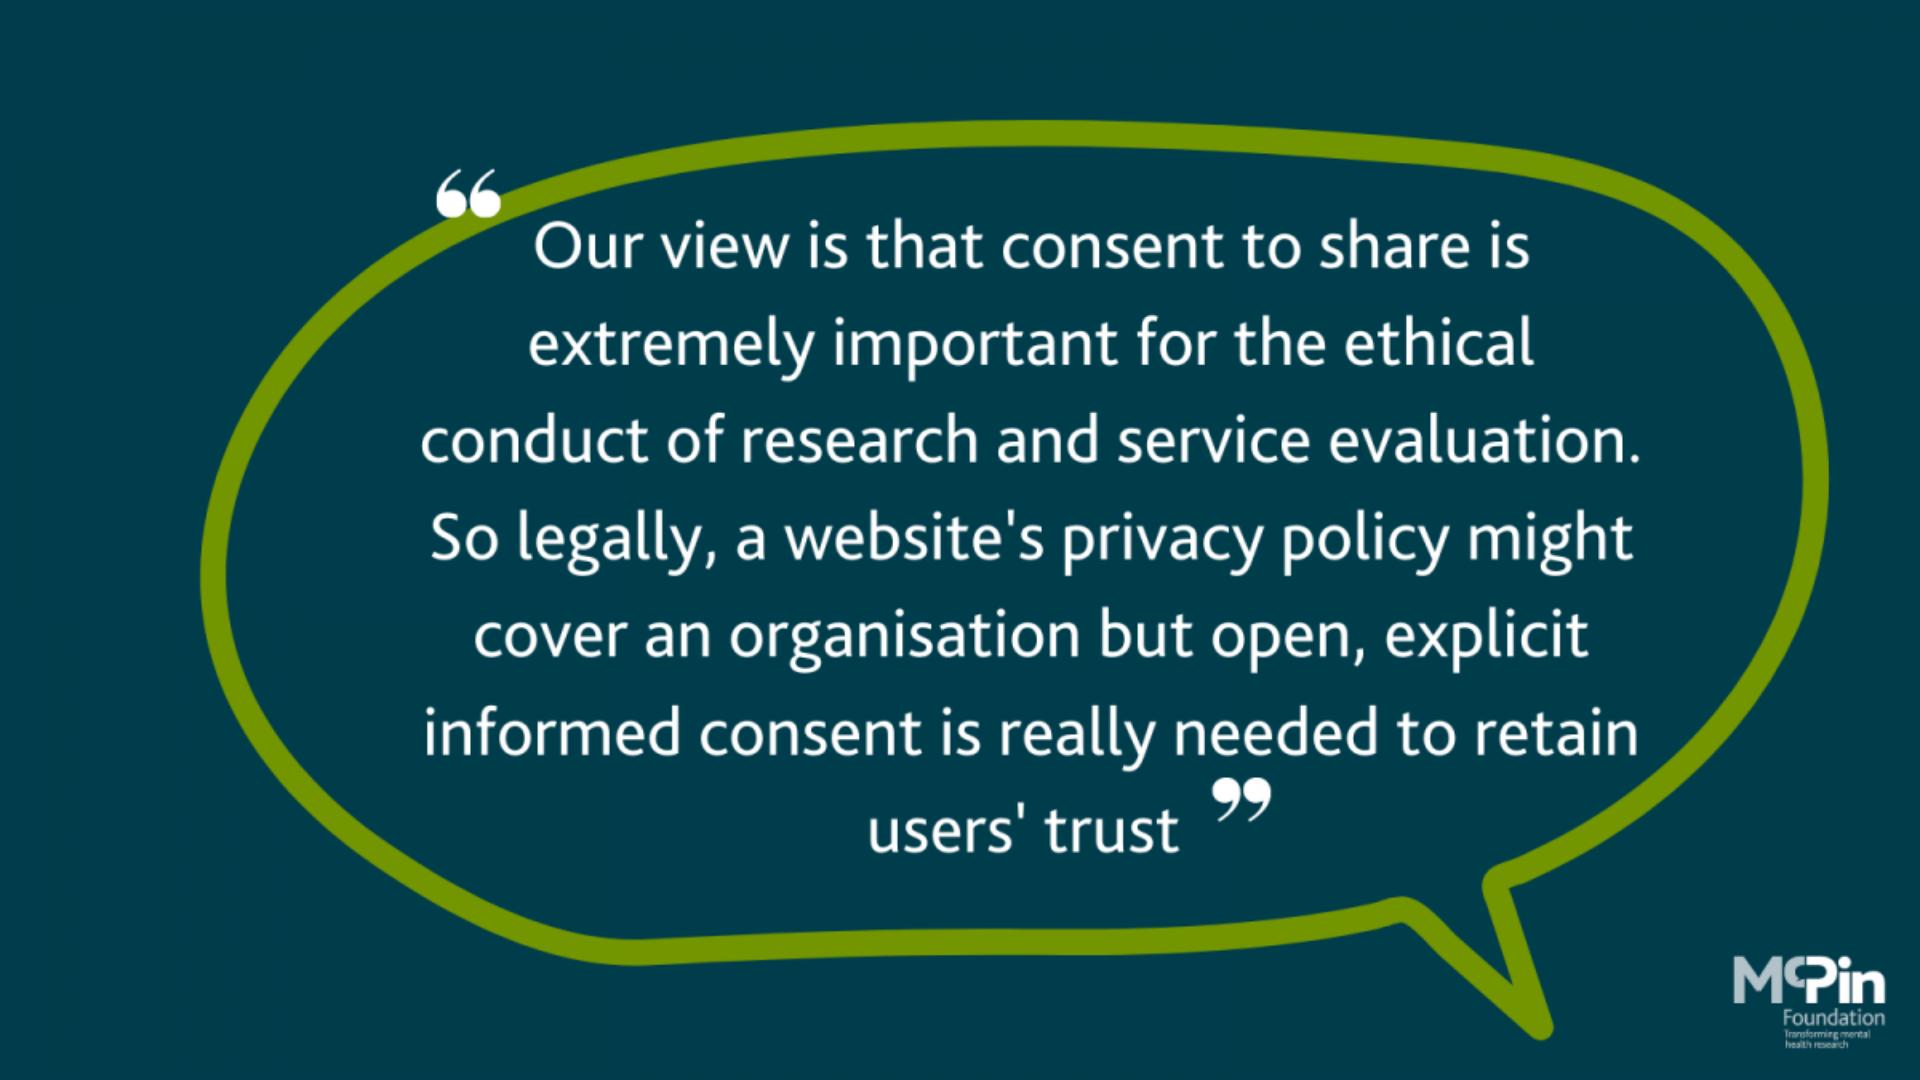 Speech bubble with a quote reading: Our view is that consent to share is extremely important for the ethical conduct of research and service evaluation. So legally, a website's privacy policy might cover an organisation but open, explicit, informed consent is really needed to retain users' trust.